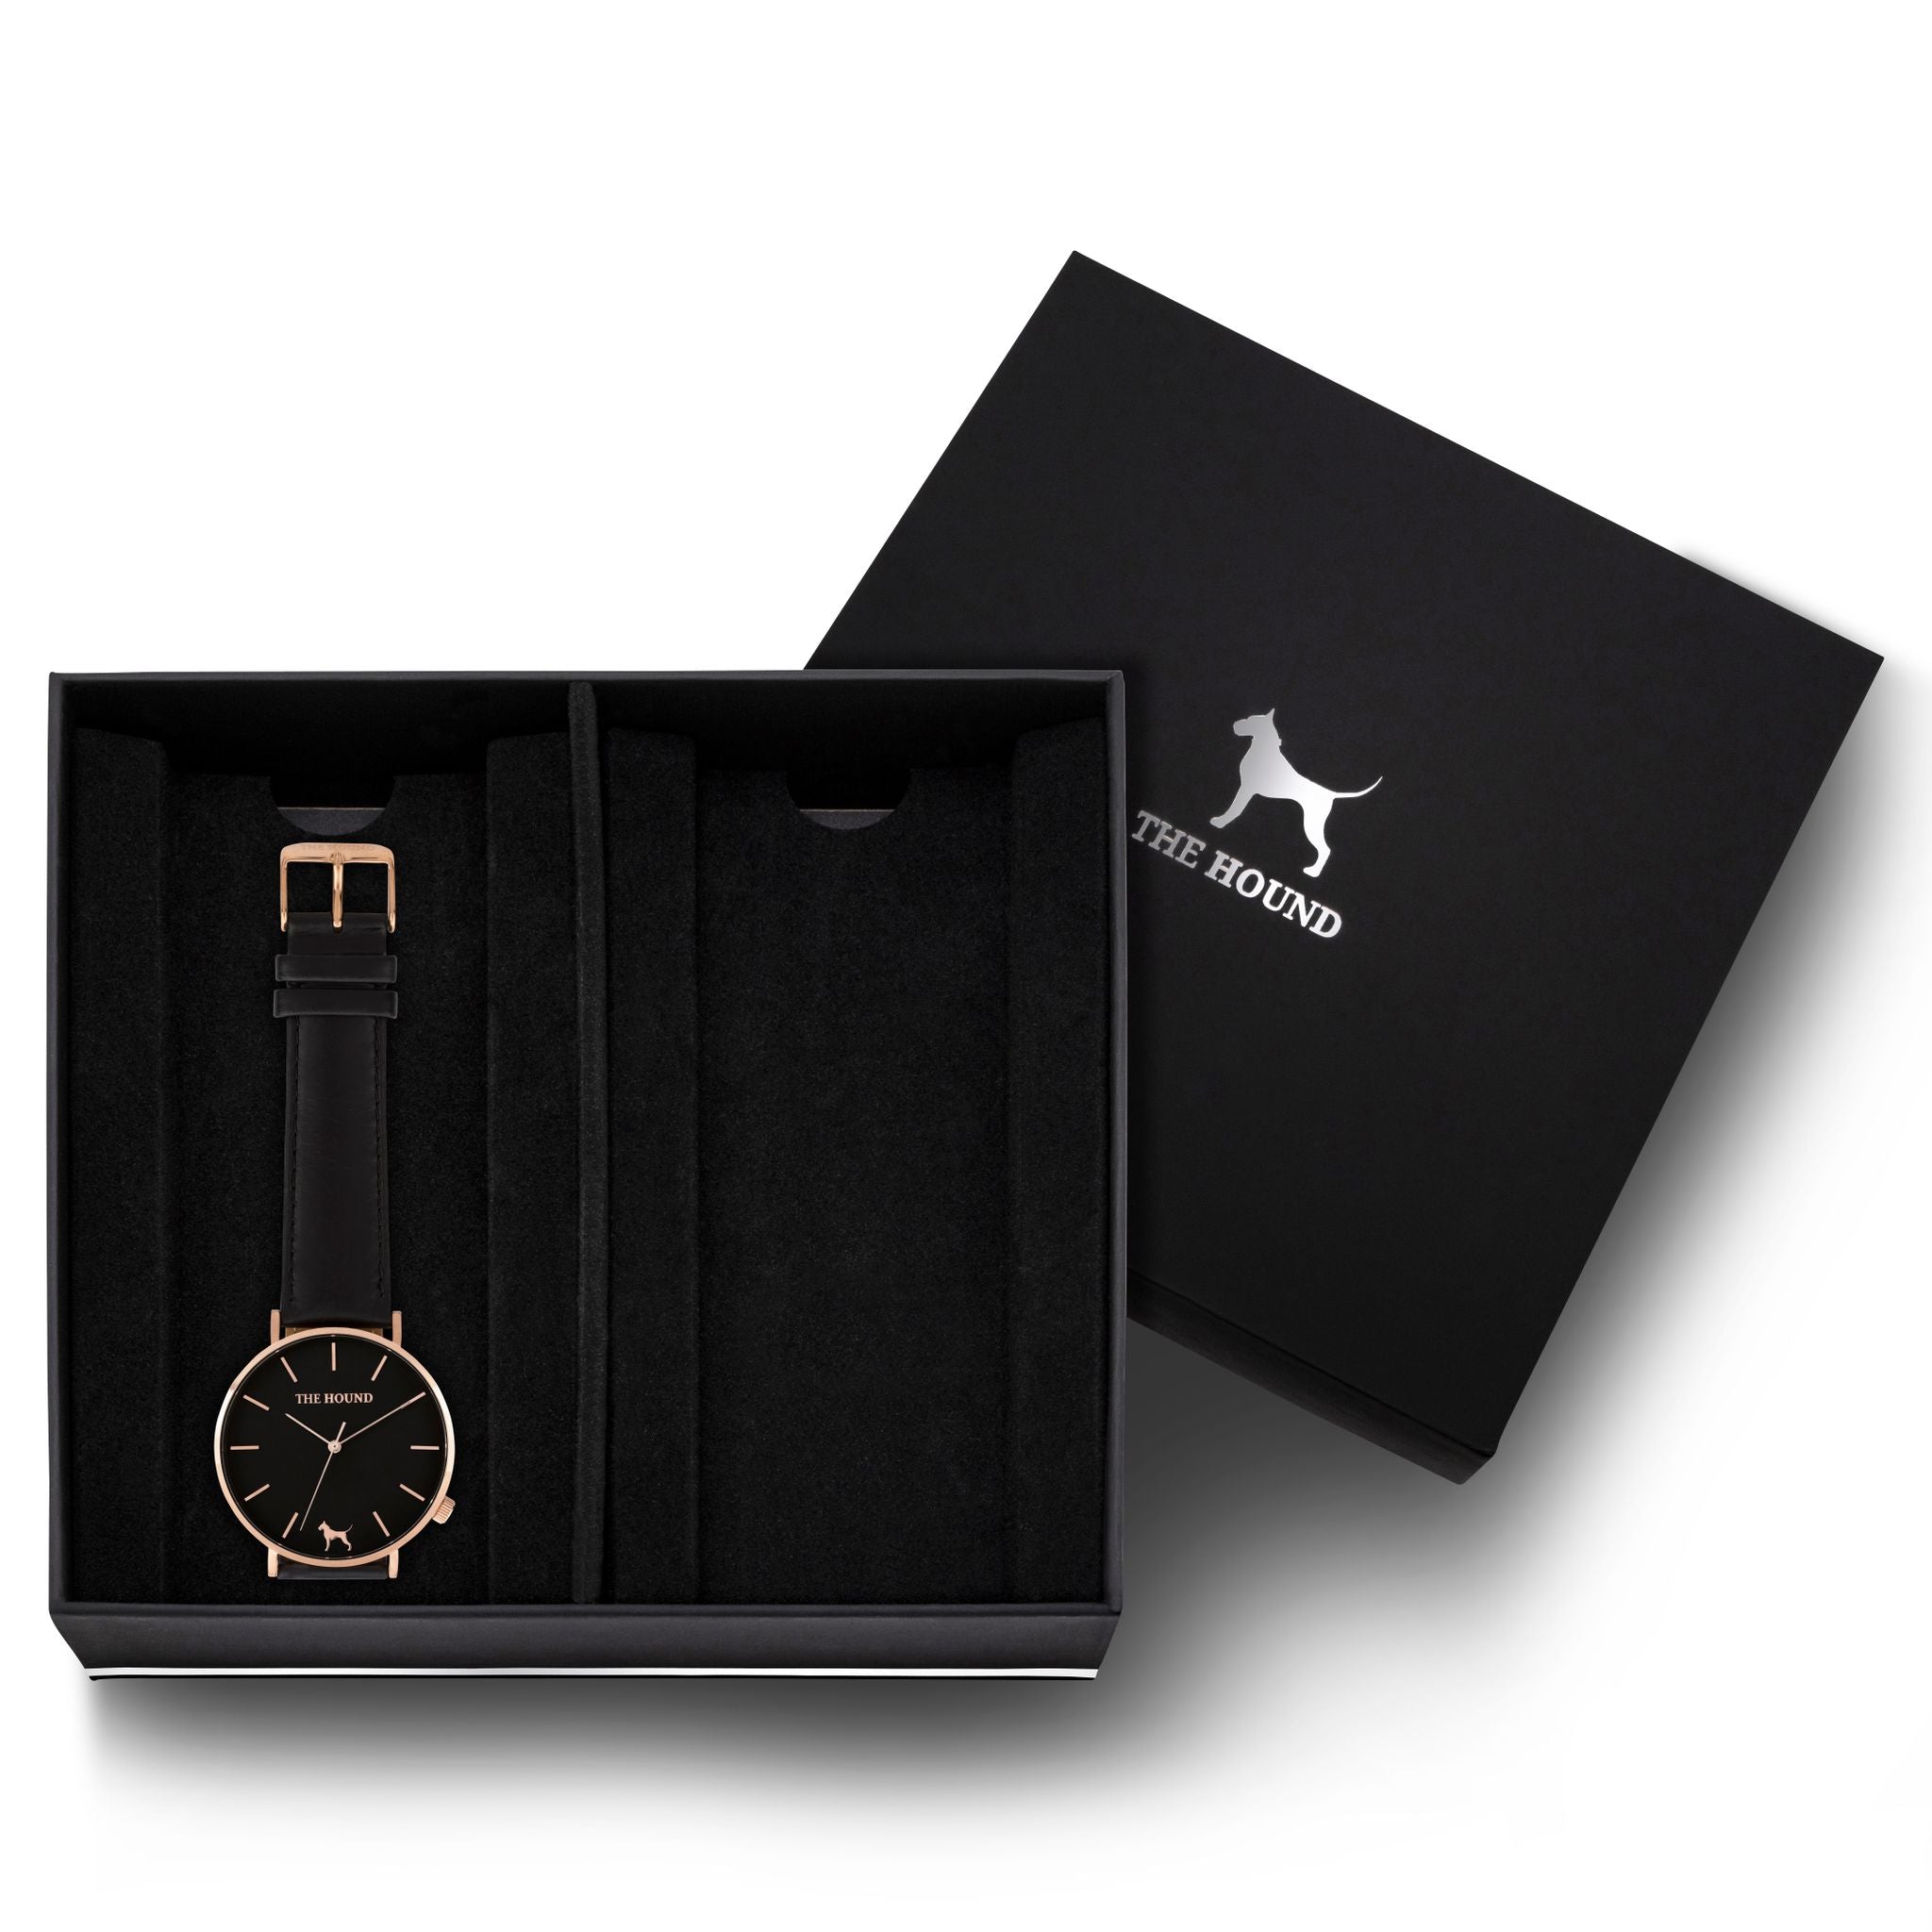 Gift Set - Black Rose Watch with Black Leather Band